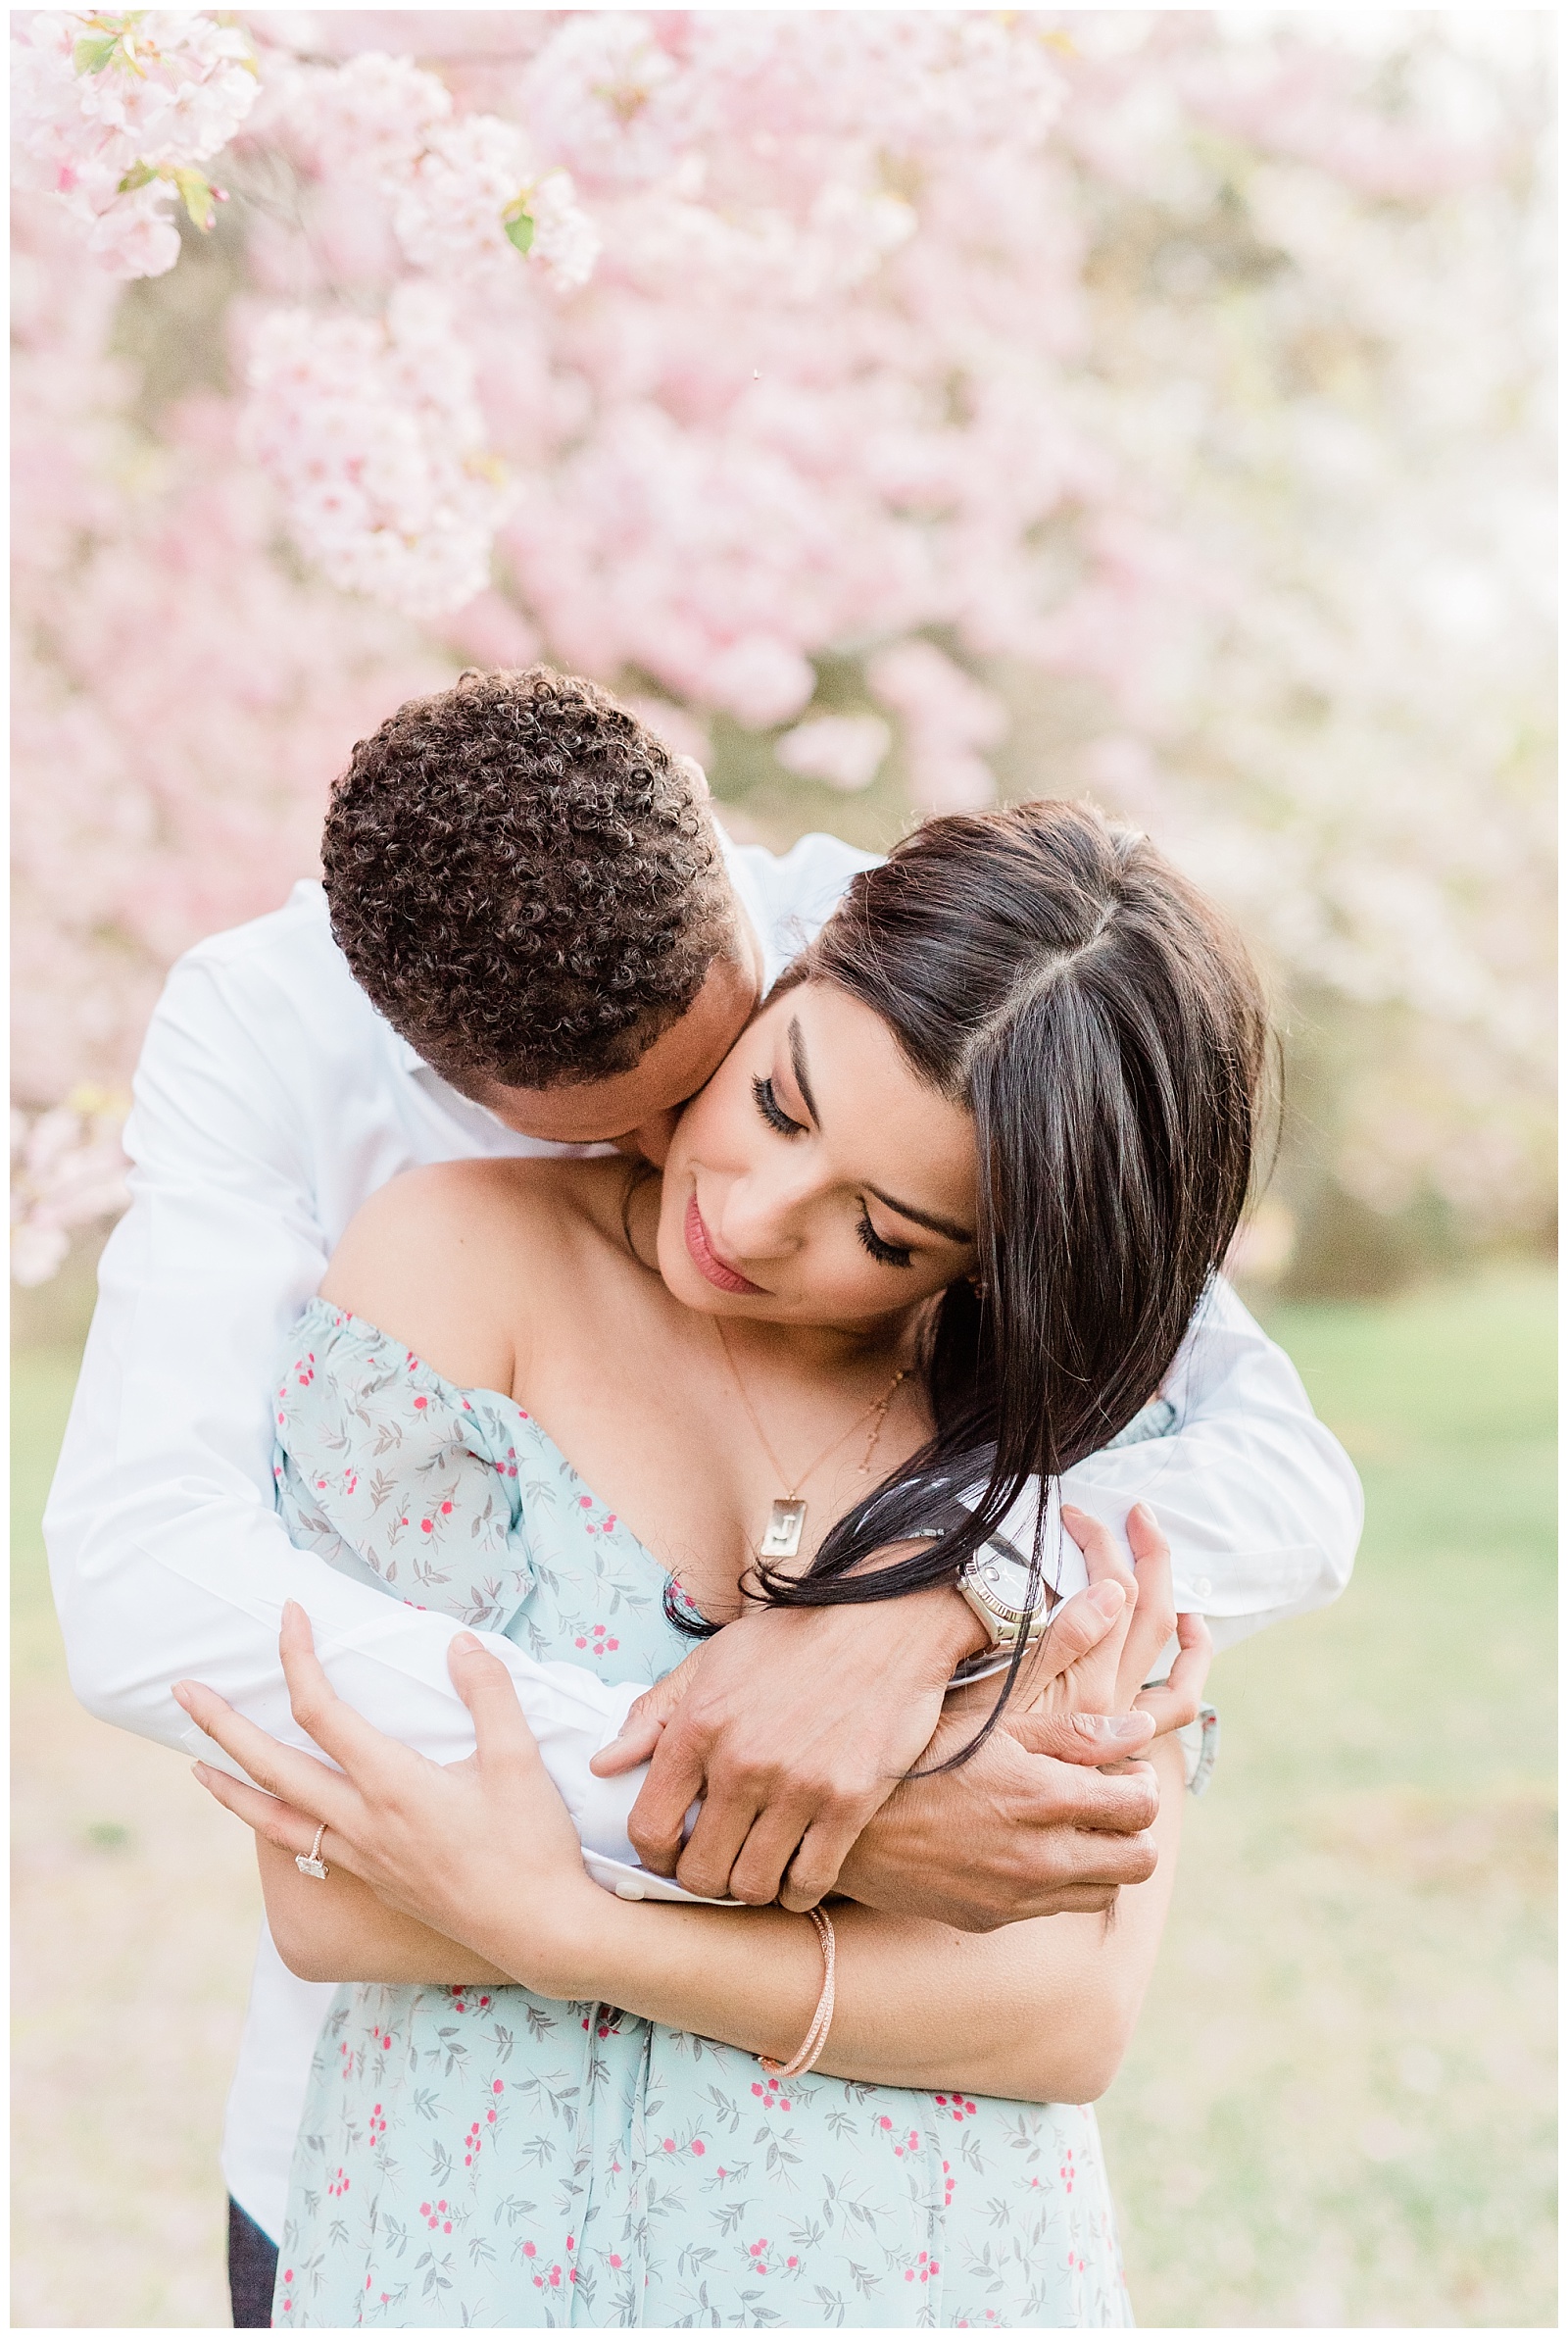 A man hugs his fiance from behind in a cherry blossom field at springtime.